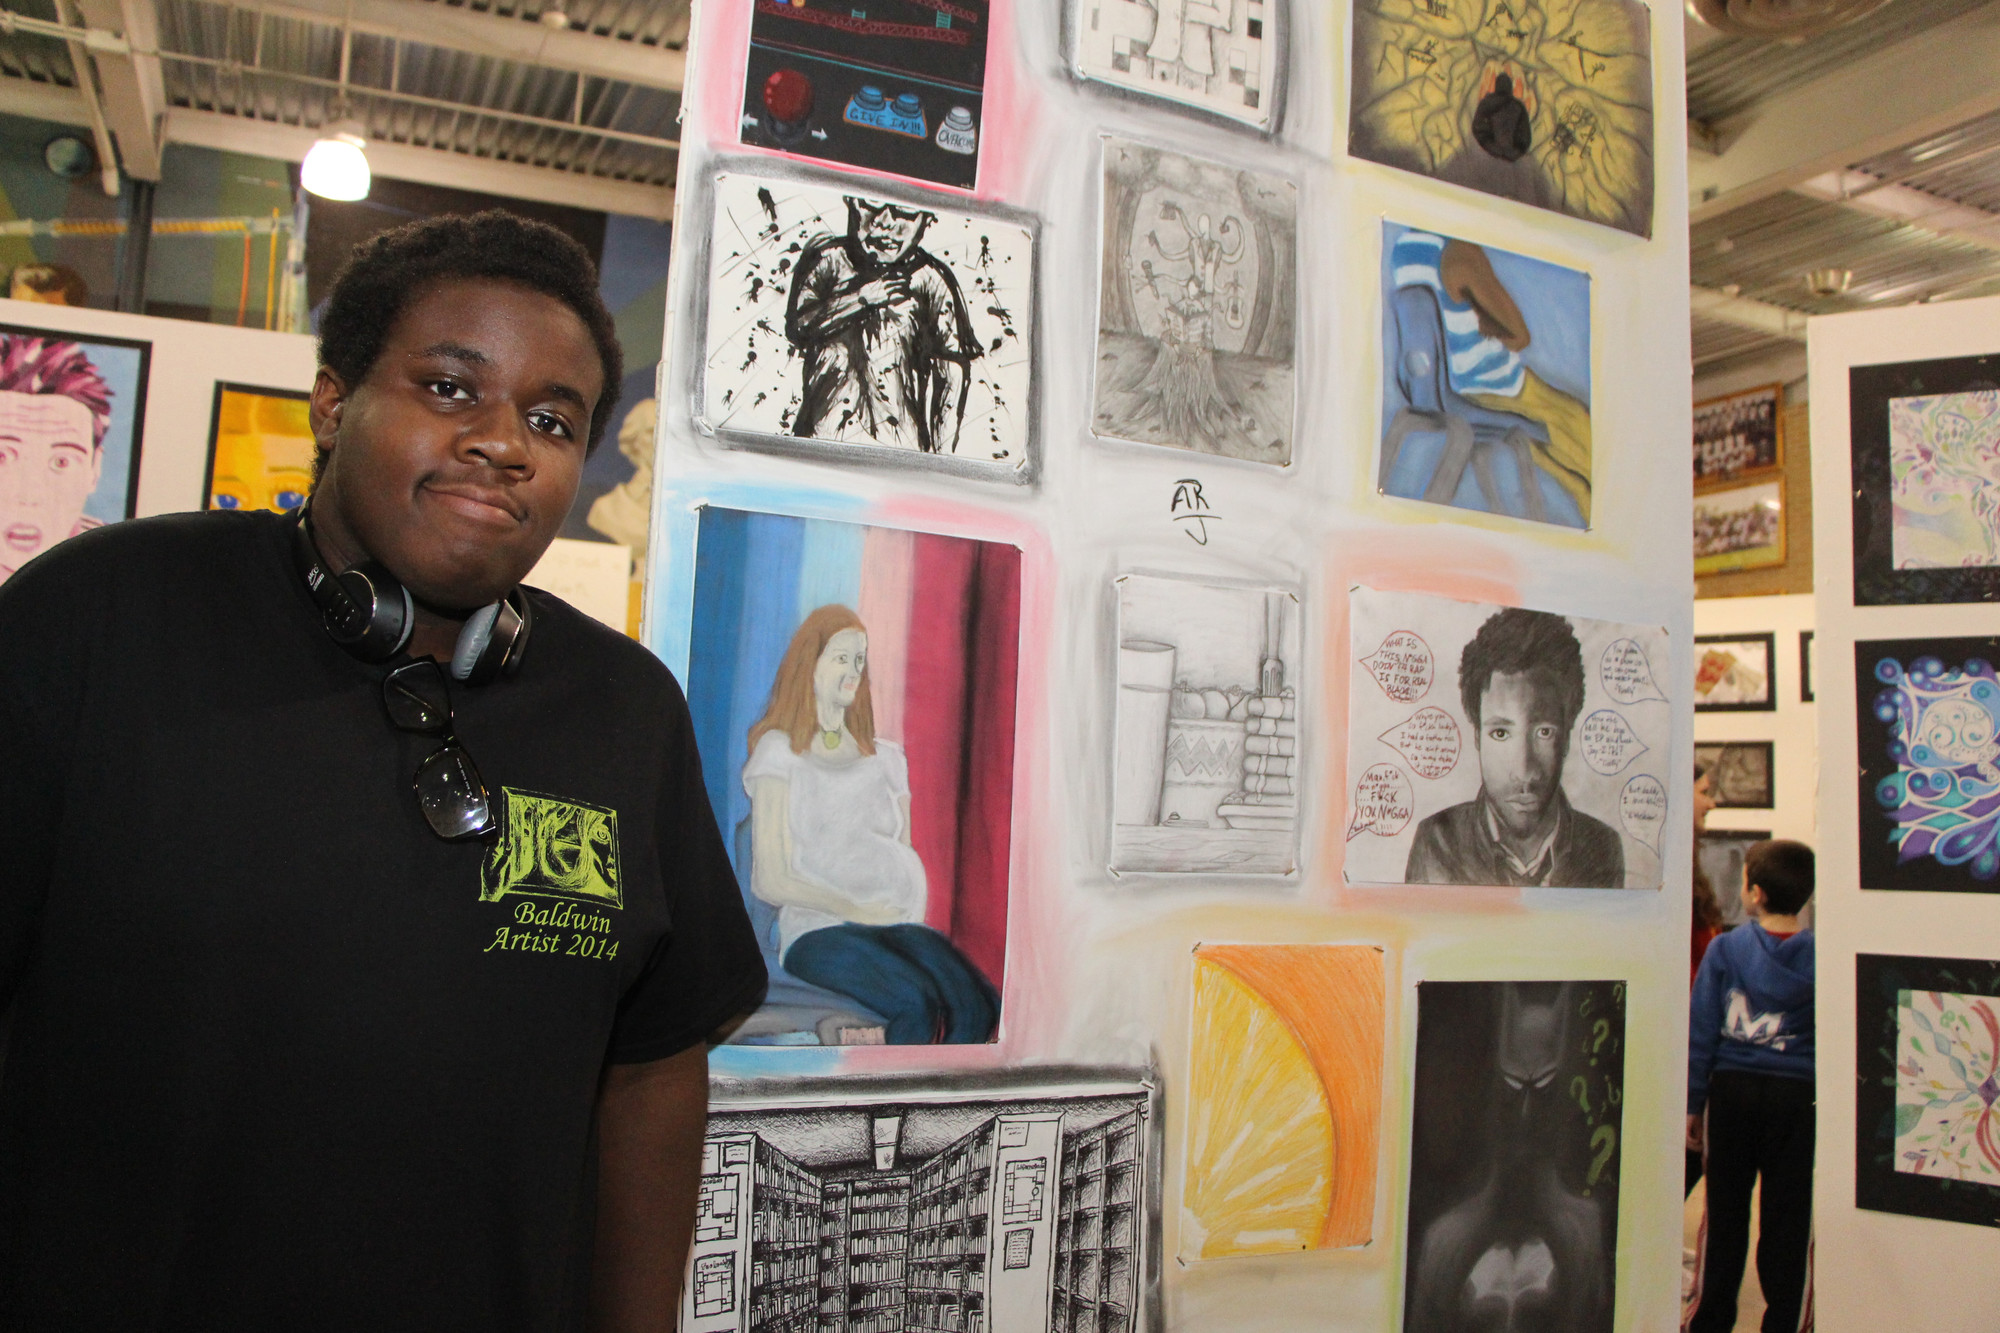 Baldwin high School students had many pieces of their artwork on their own display, including senior Avery Reid, during the school’s ninth annual Evening Art Exhibition on April 29.